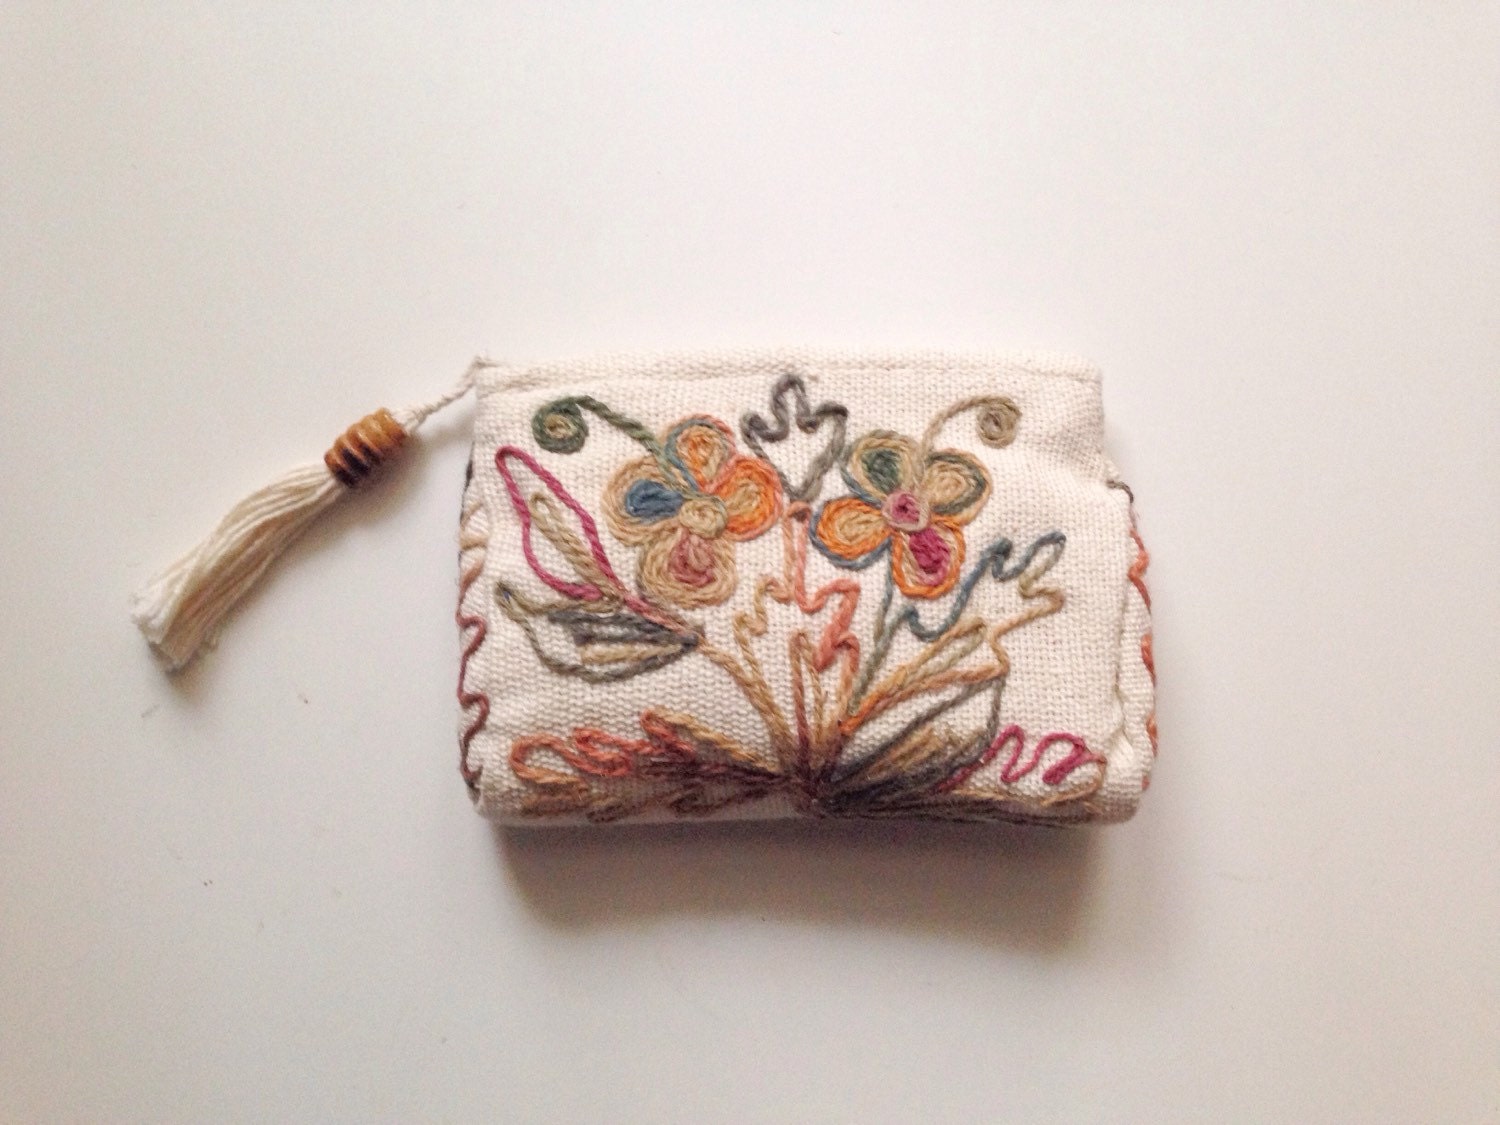 Vintage Embroidered Coin Purse by AnthologyofVi on Etsy